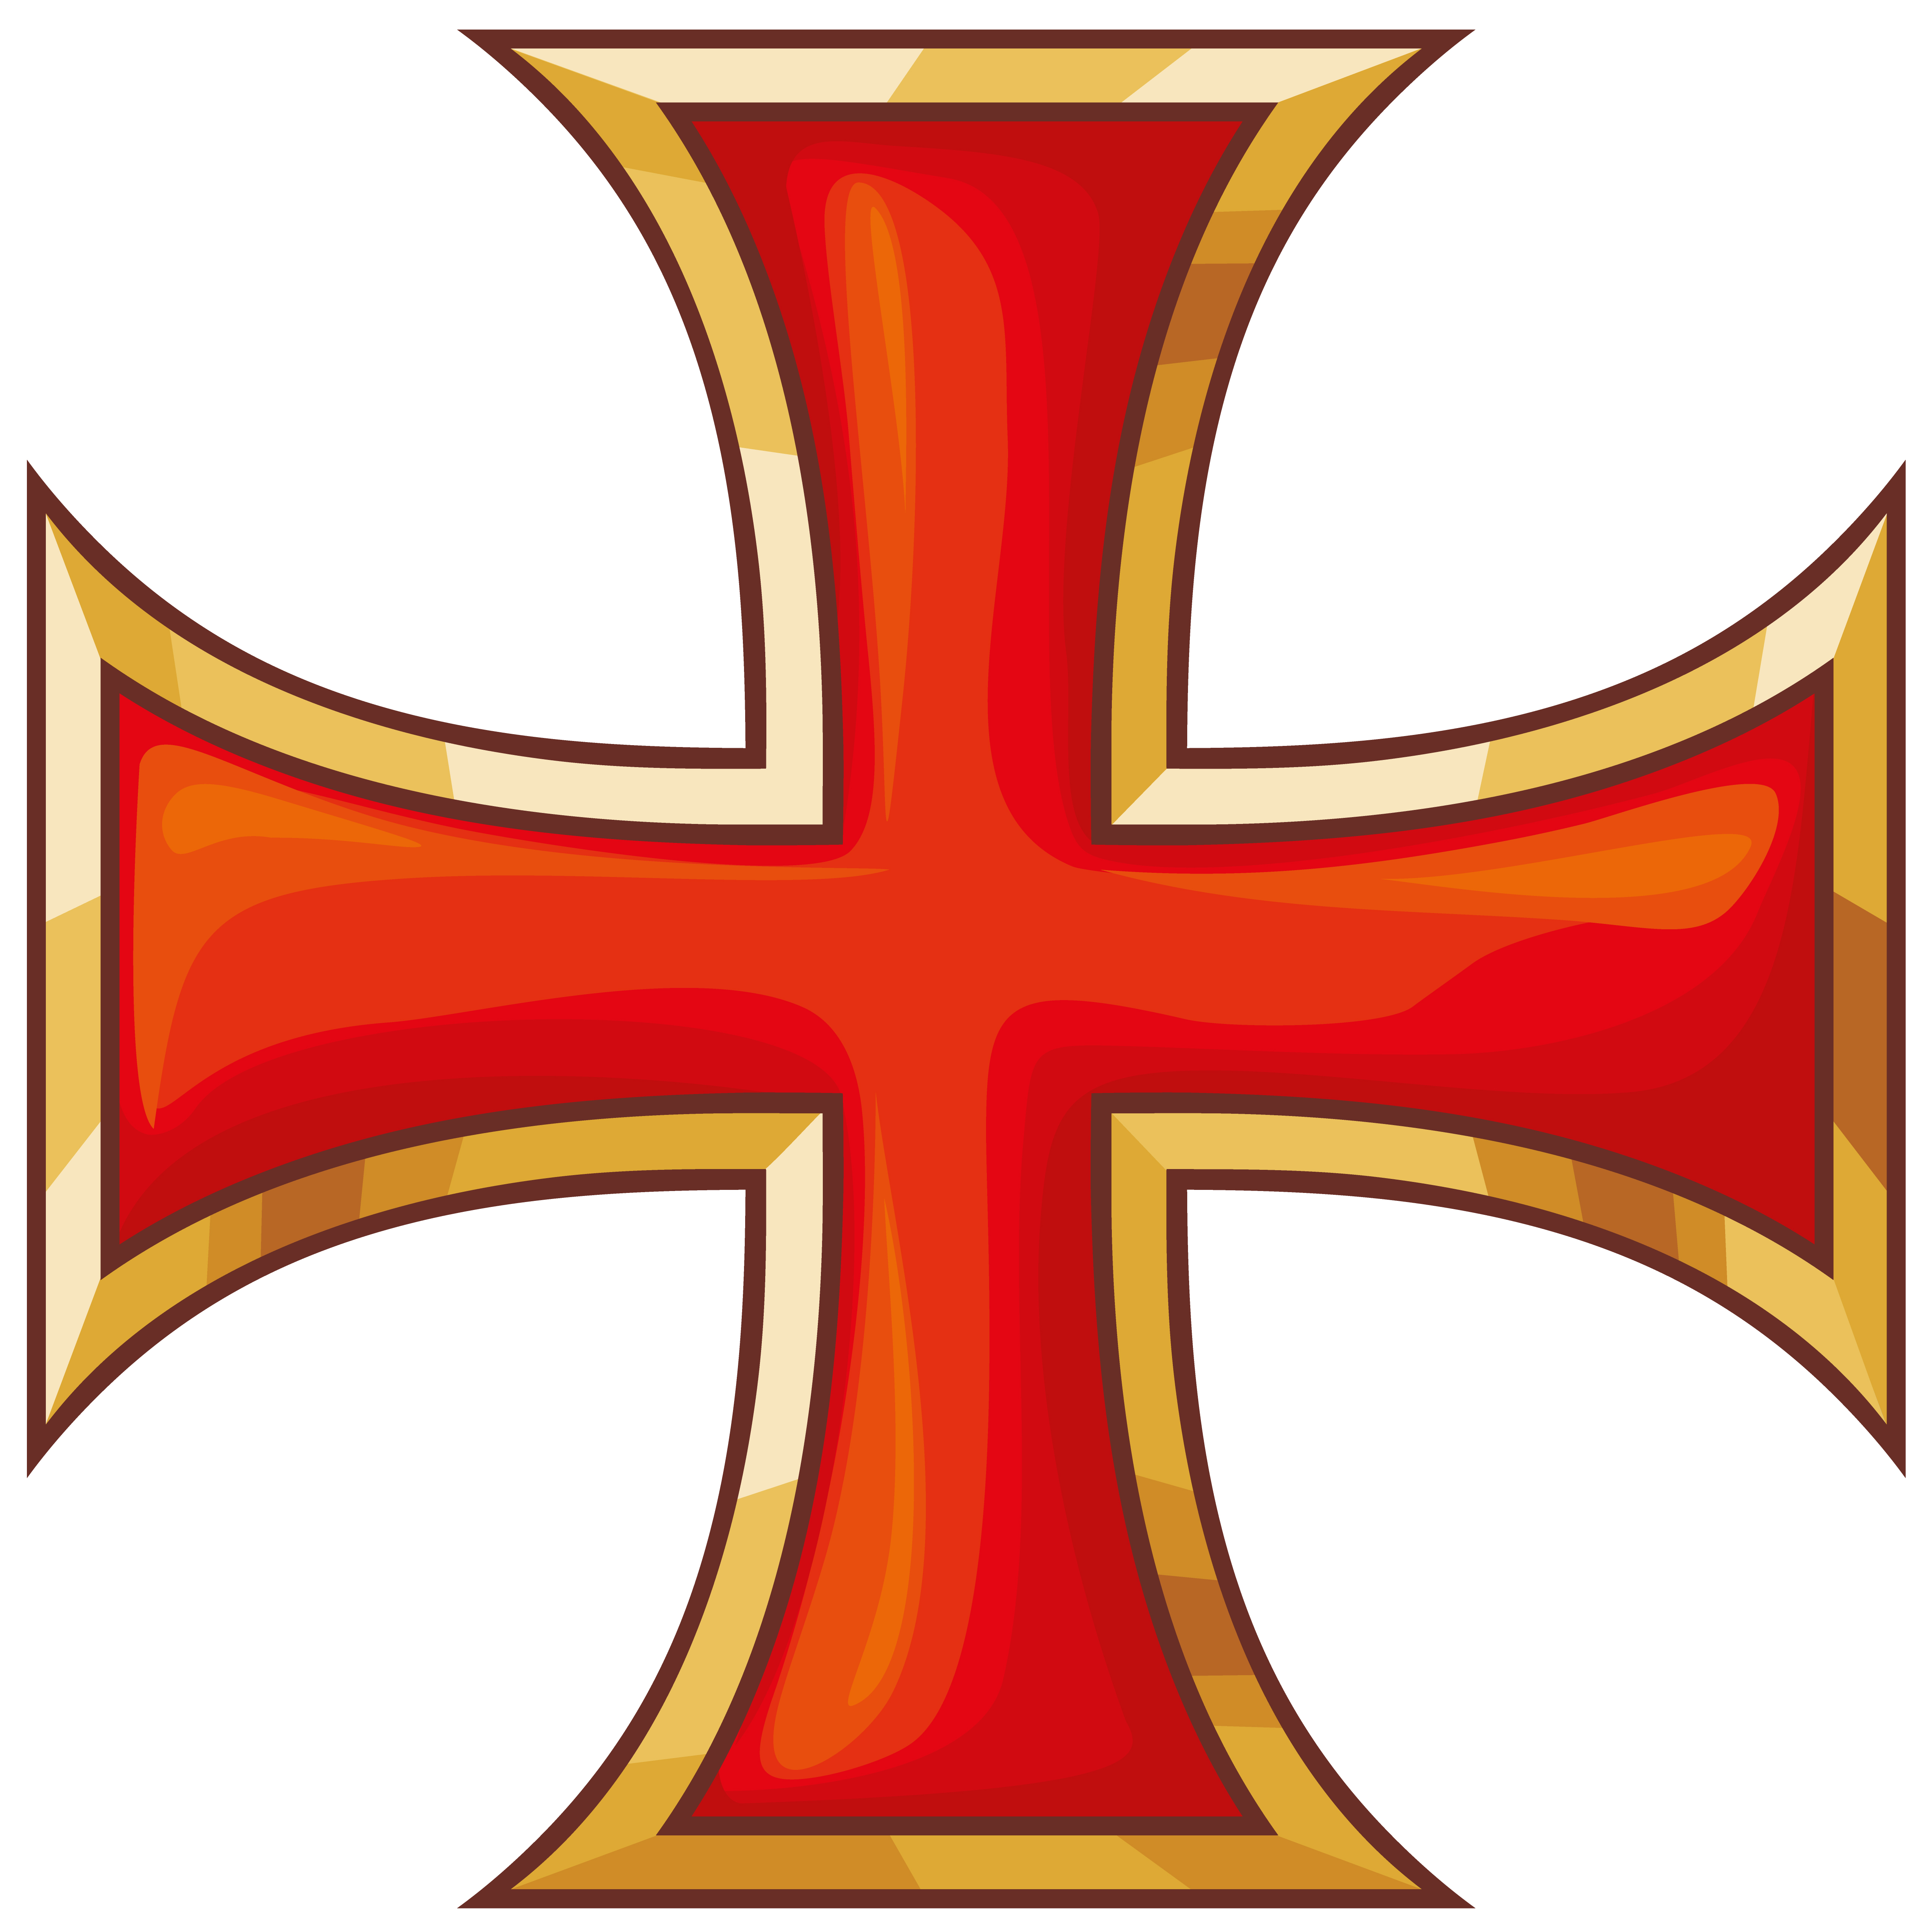 Maltese Cross Symbol, Its Meaning, History And Relation To The Firefighter Emblem - Mythologian